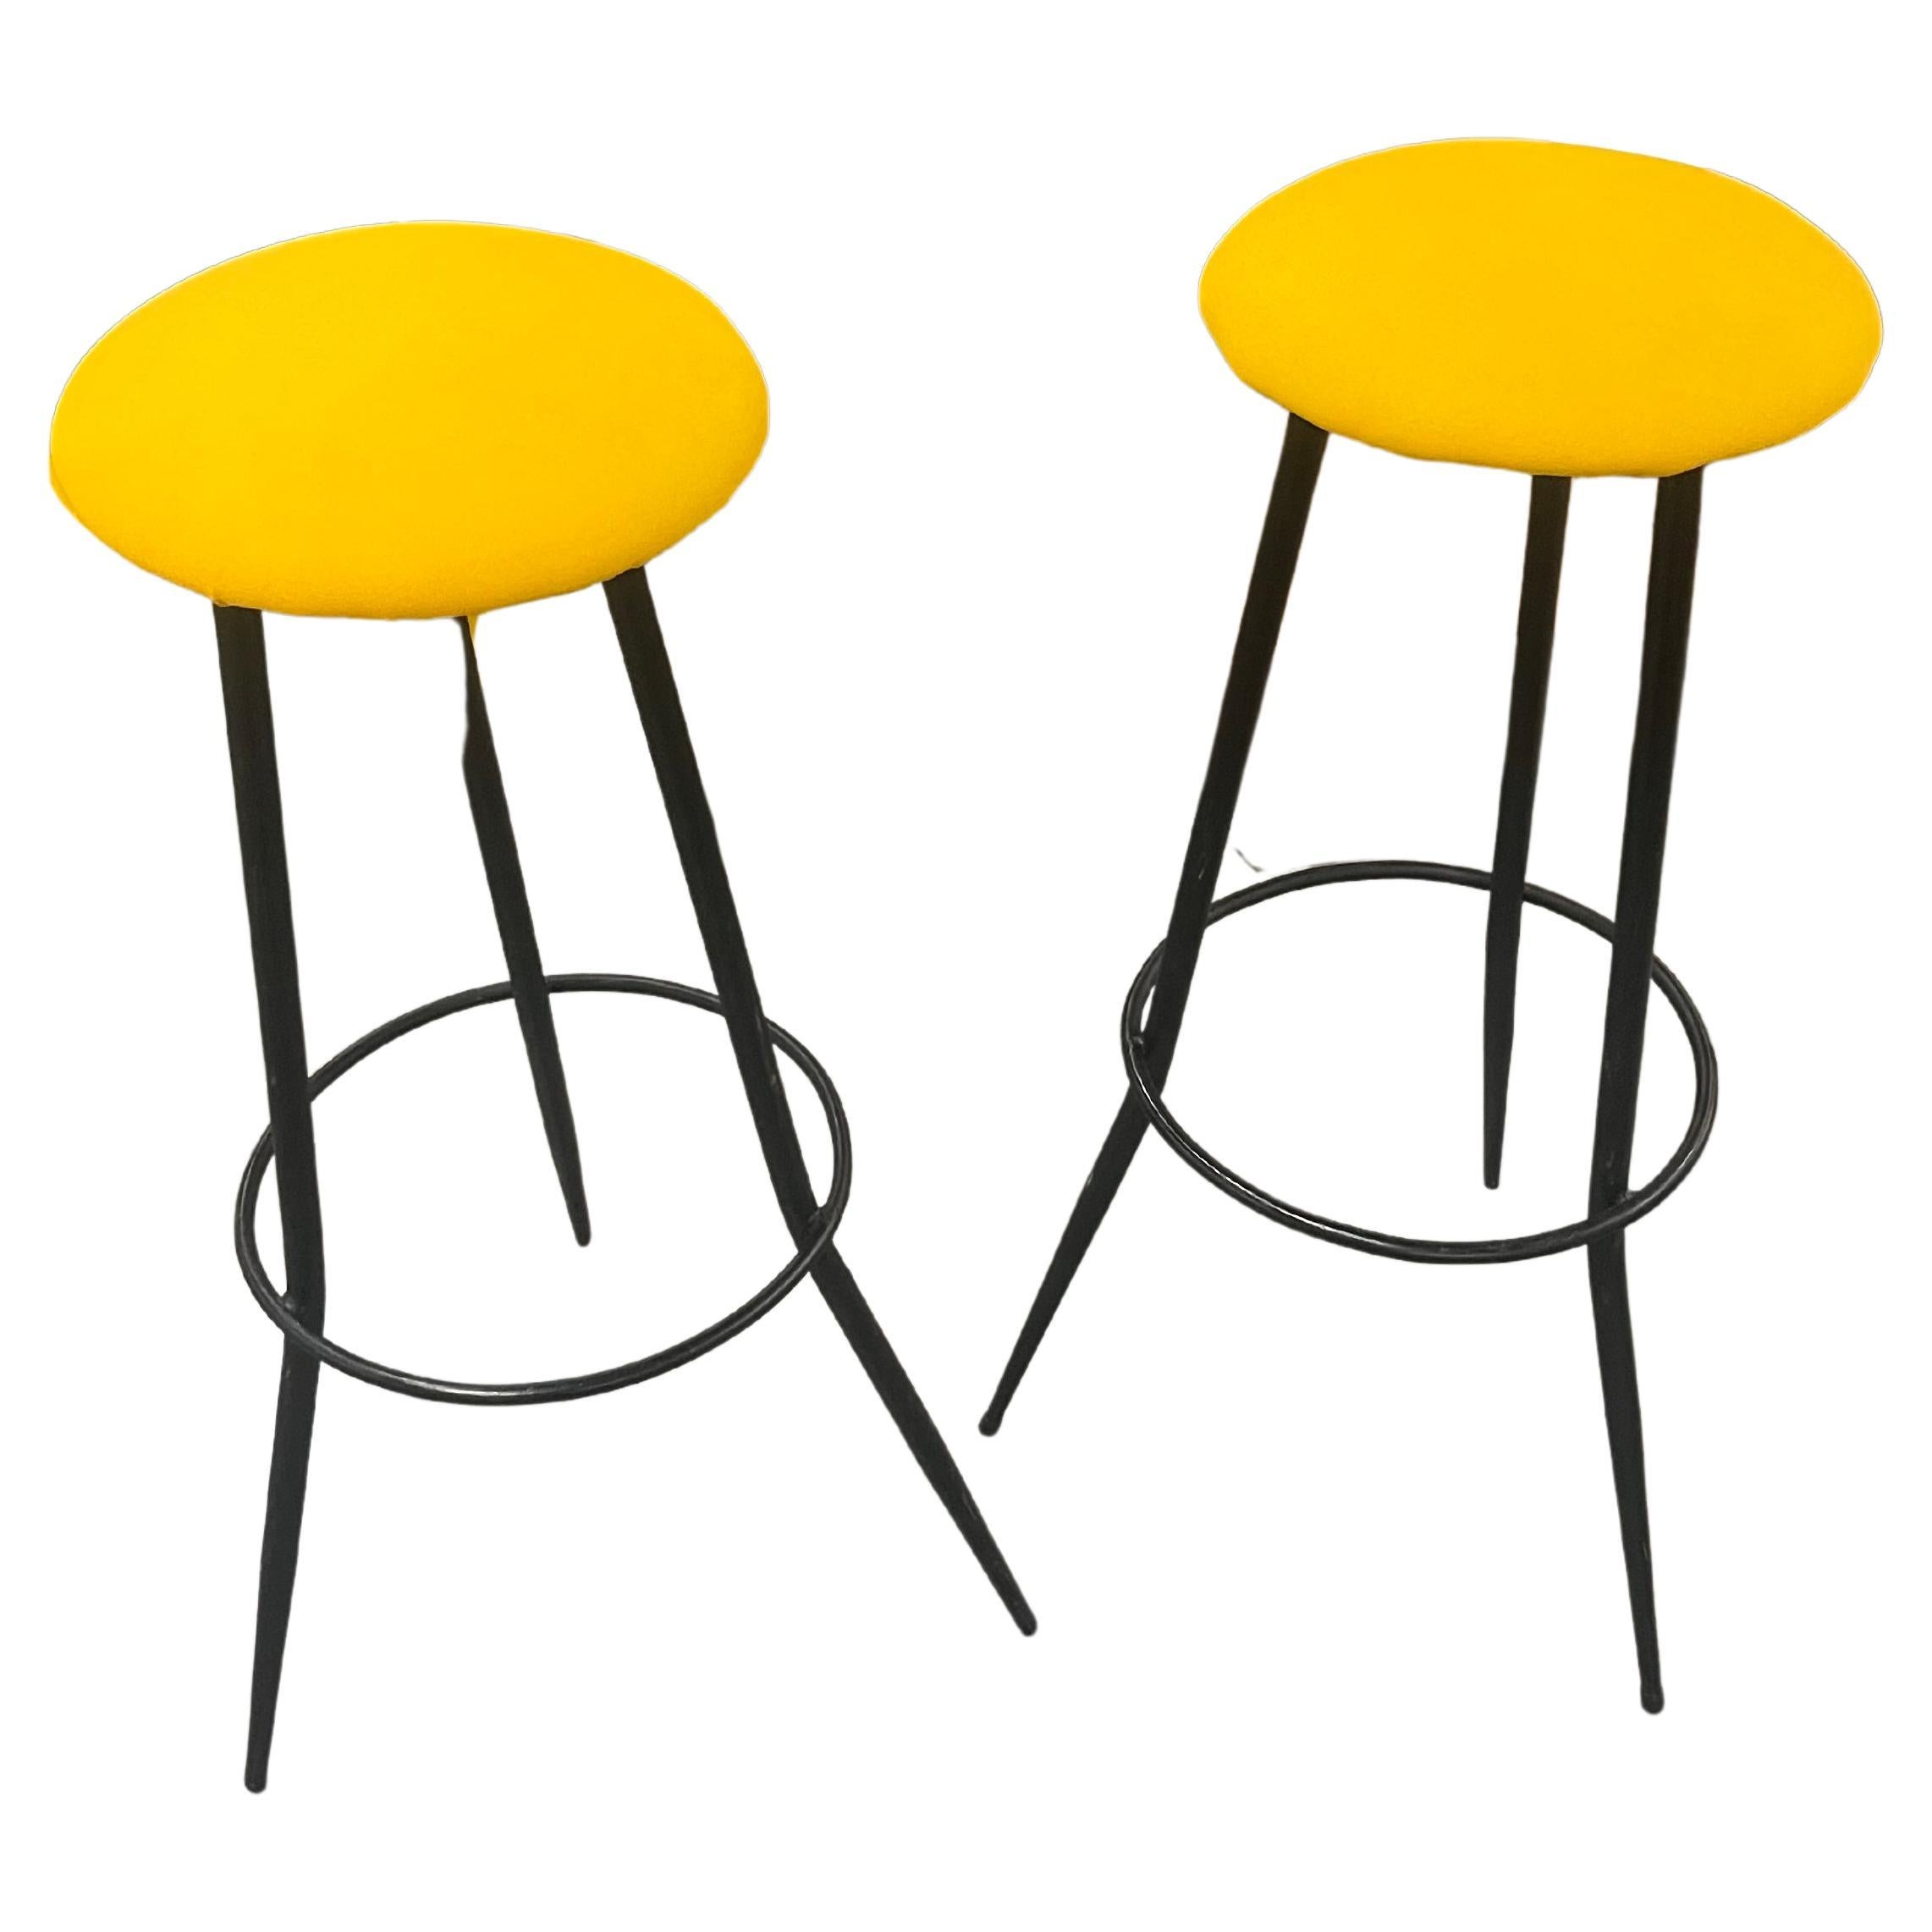 Pair of 1970s bar stools made of iron and yellow sky seat